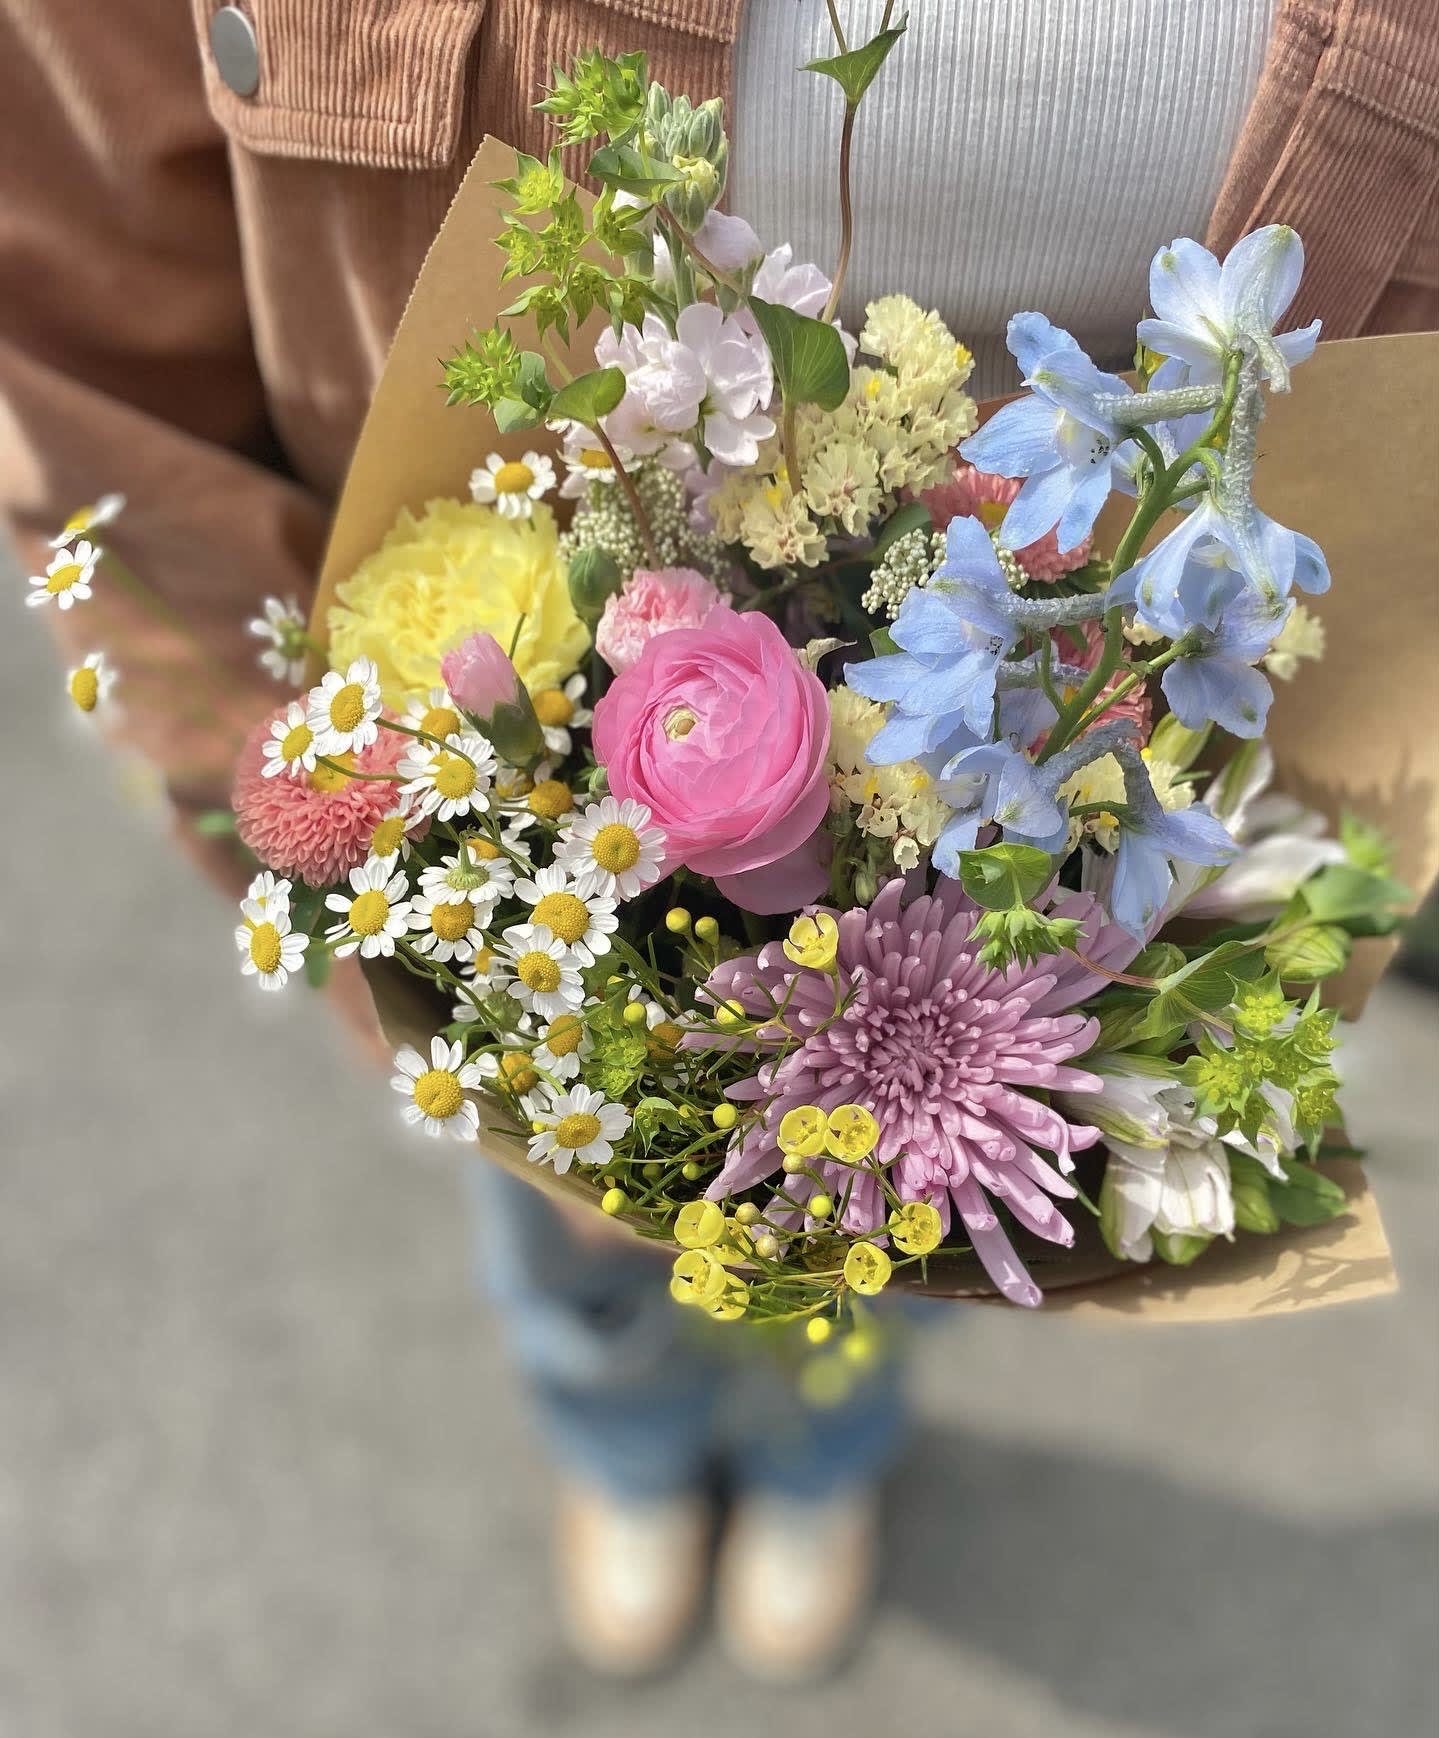 Bouquet of Mixed Flowers Wrapped in Paper